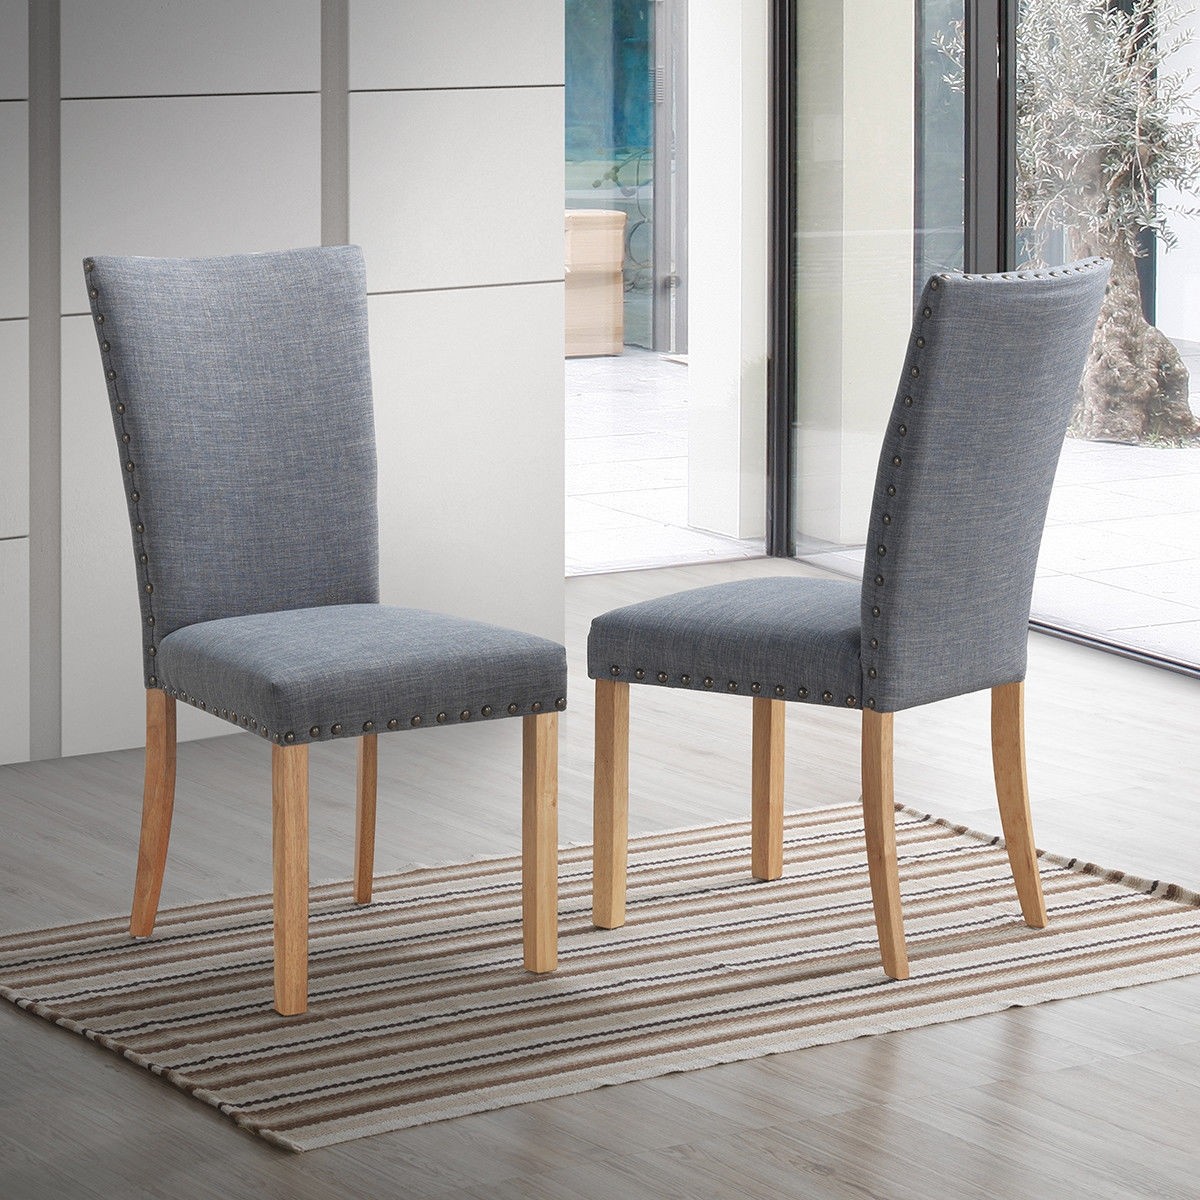 Set Of 2 Armless Fabric Upholstered Nailhead Dining Chairs